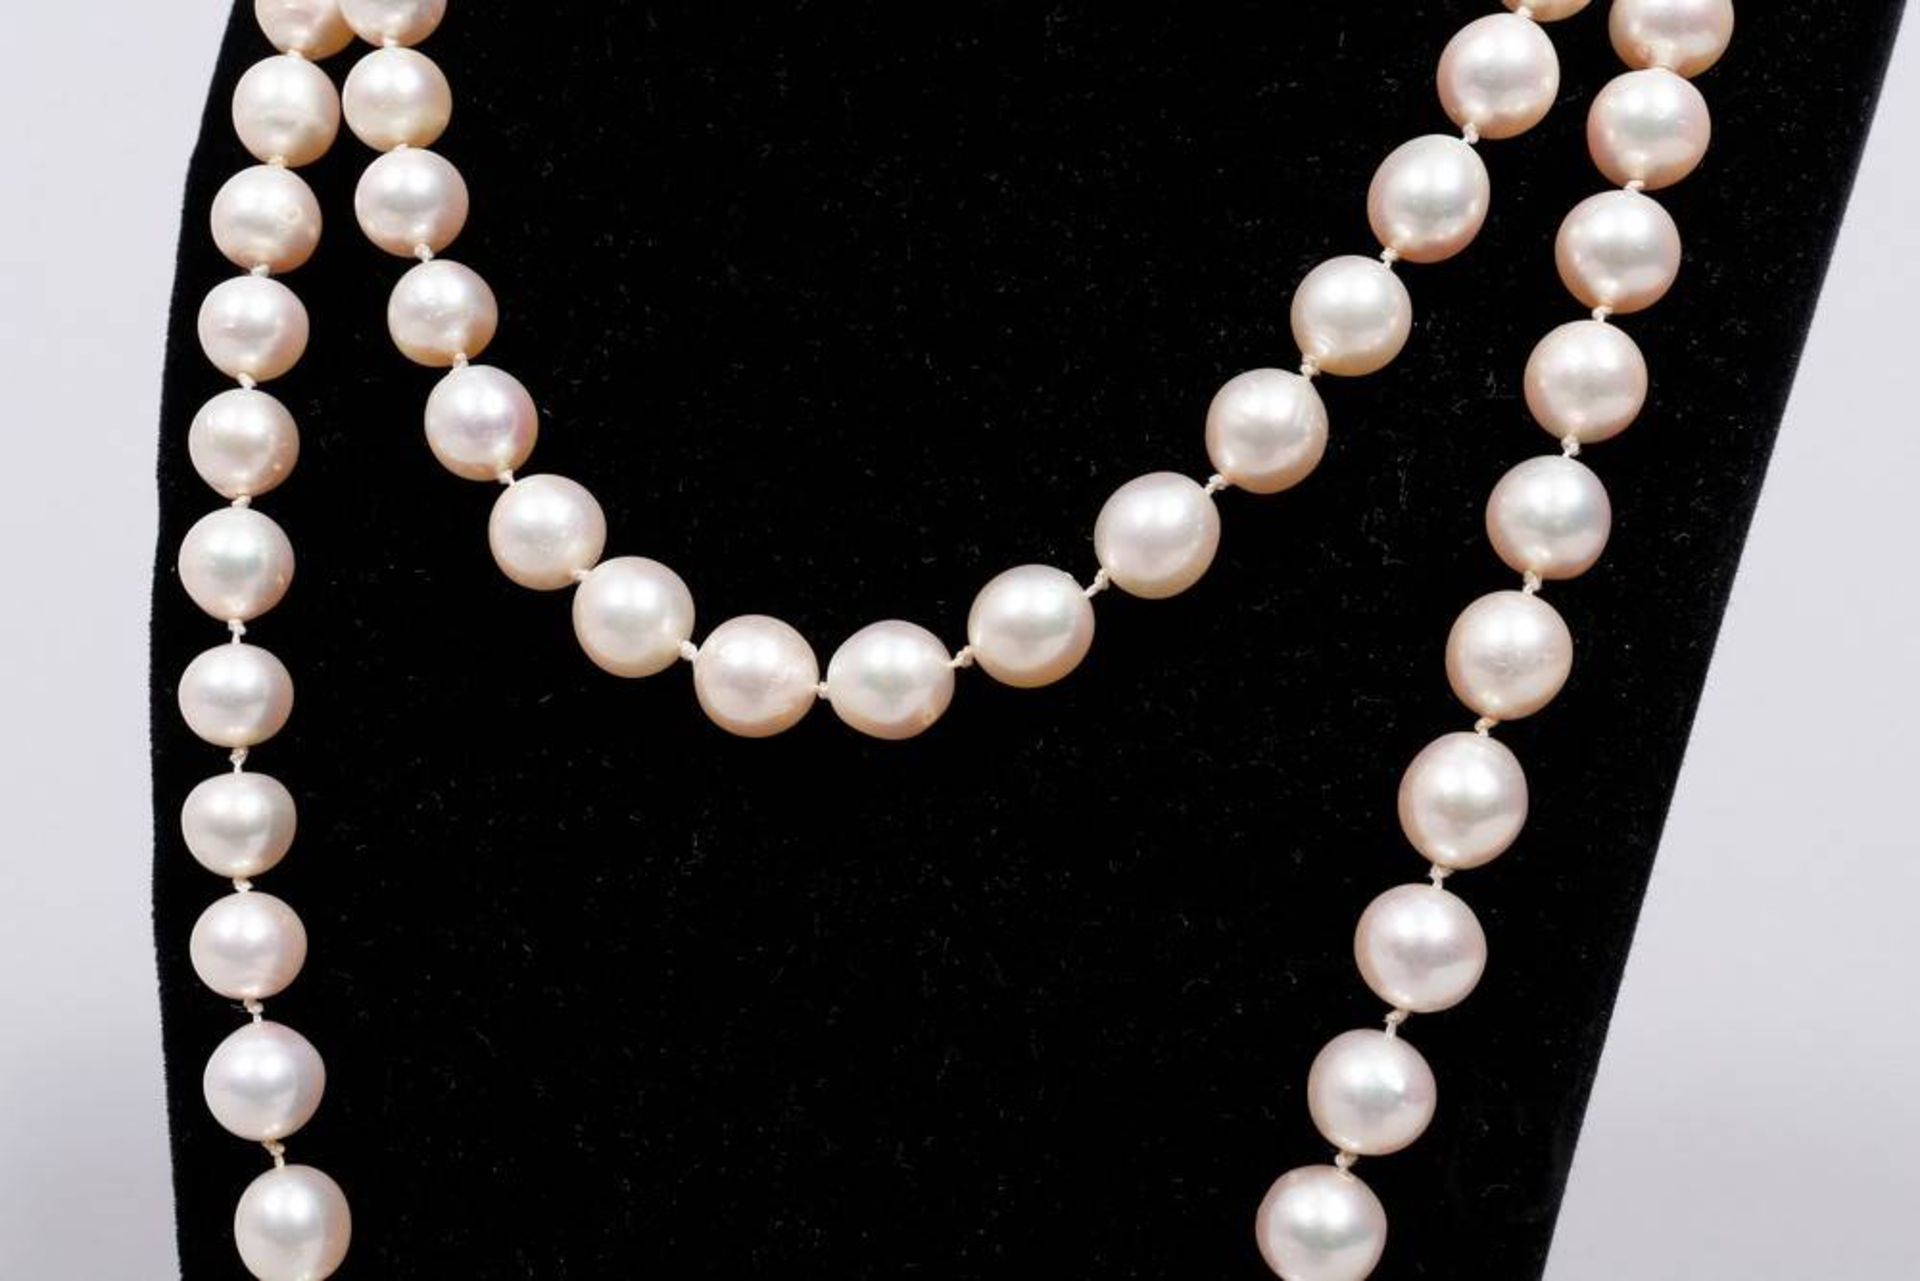 Pearl necklace, 585 WG ball clasp - Image 2 of 4